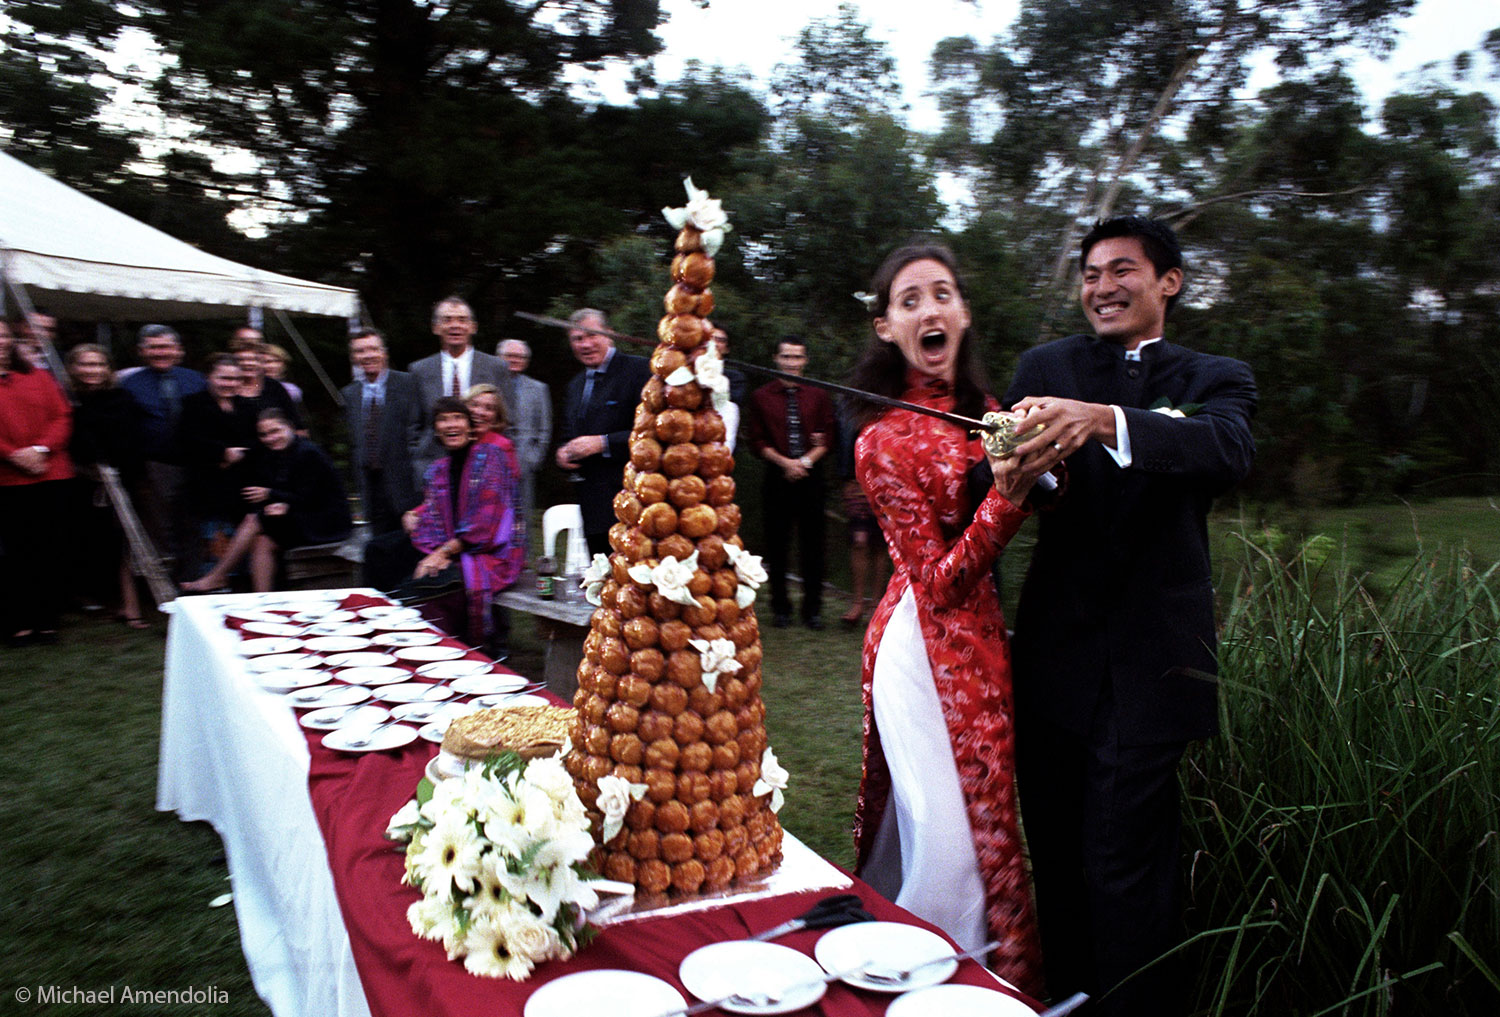 The Wedding the Sword and the Croque-en-bouche cake